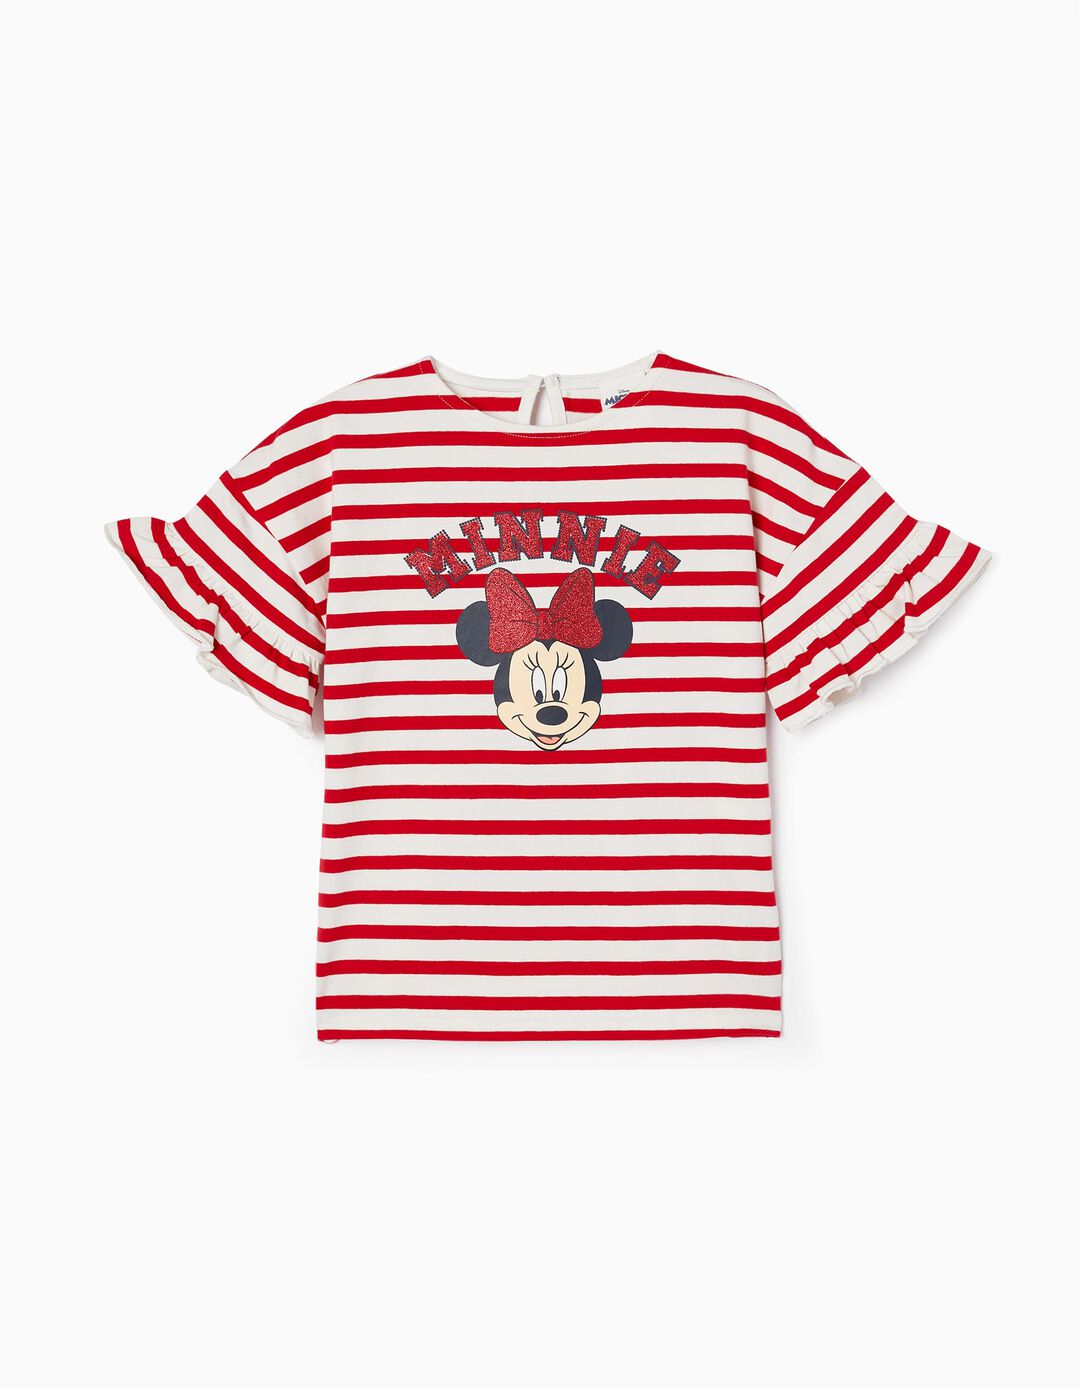 Striped T-shirt for Girls 'Minnie', White/Red